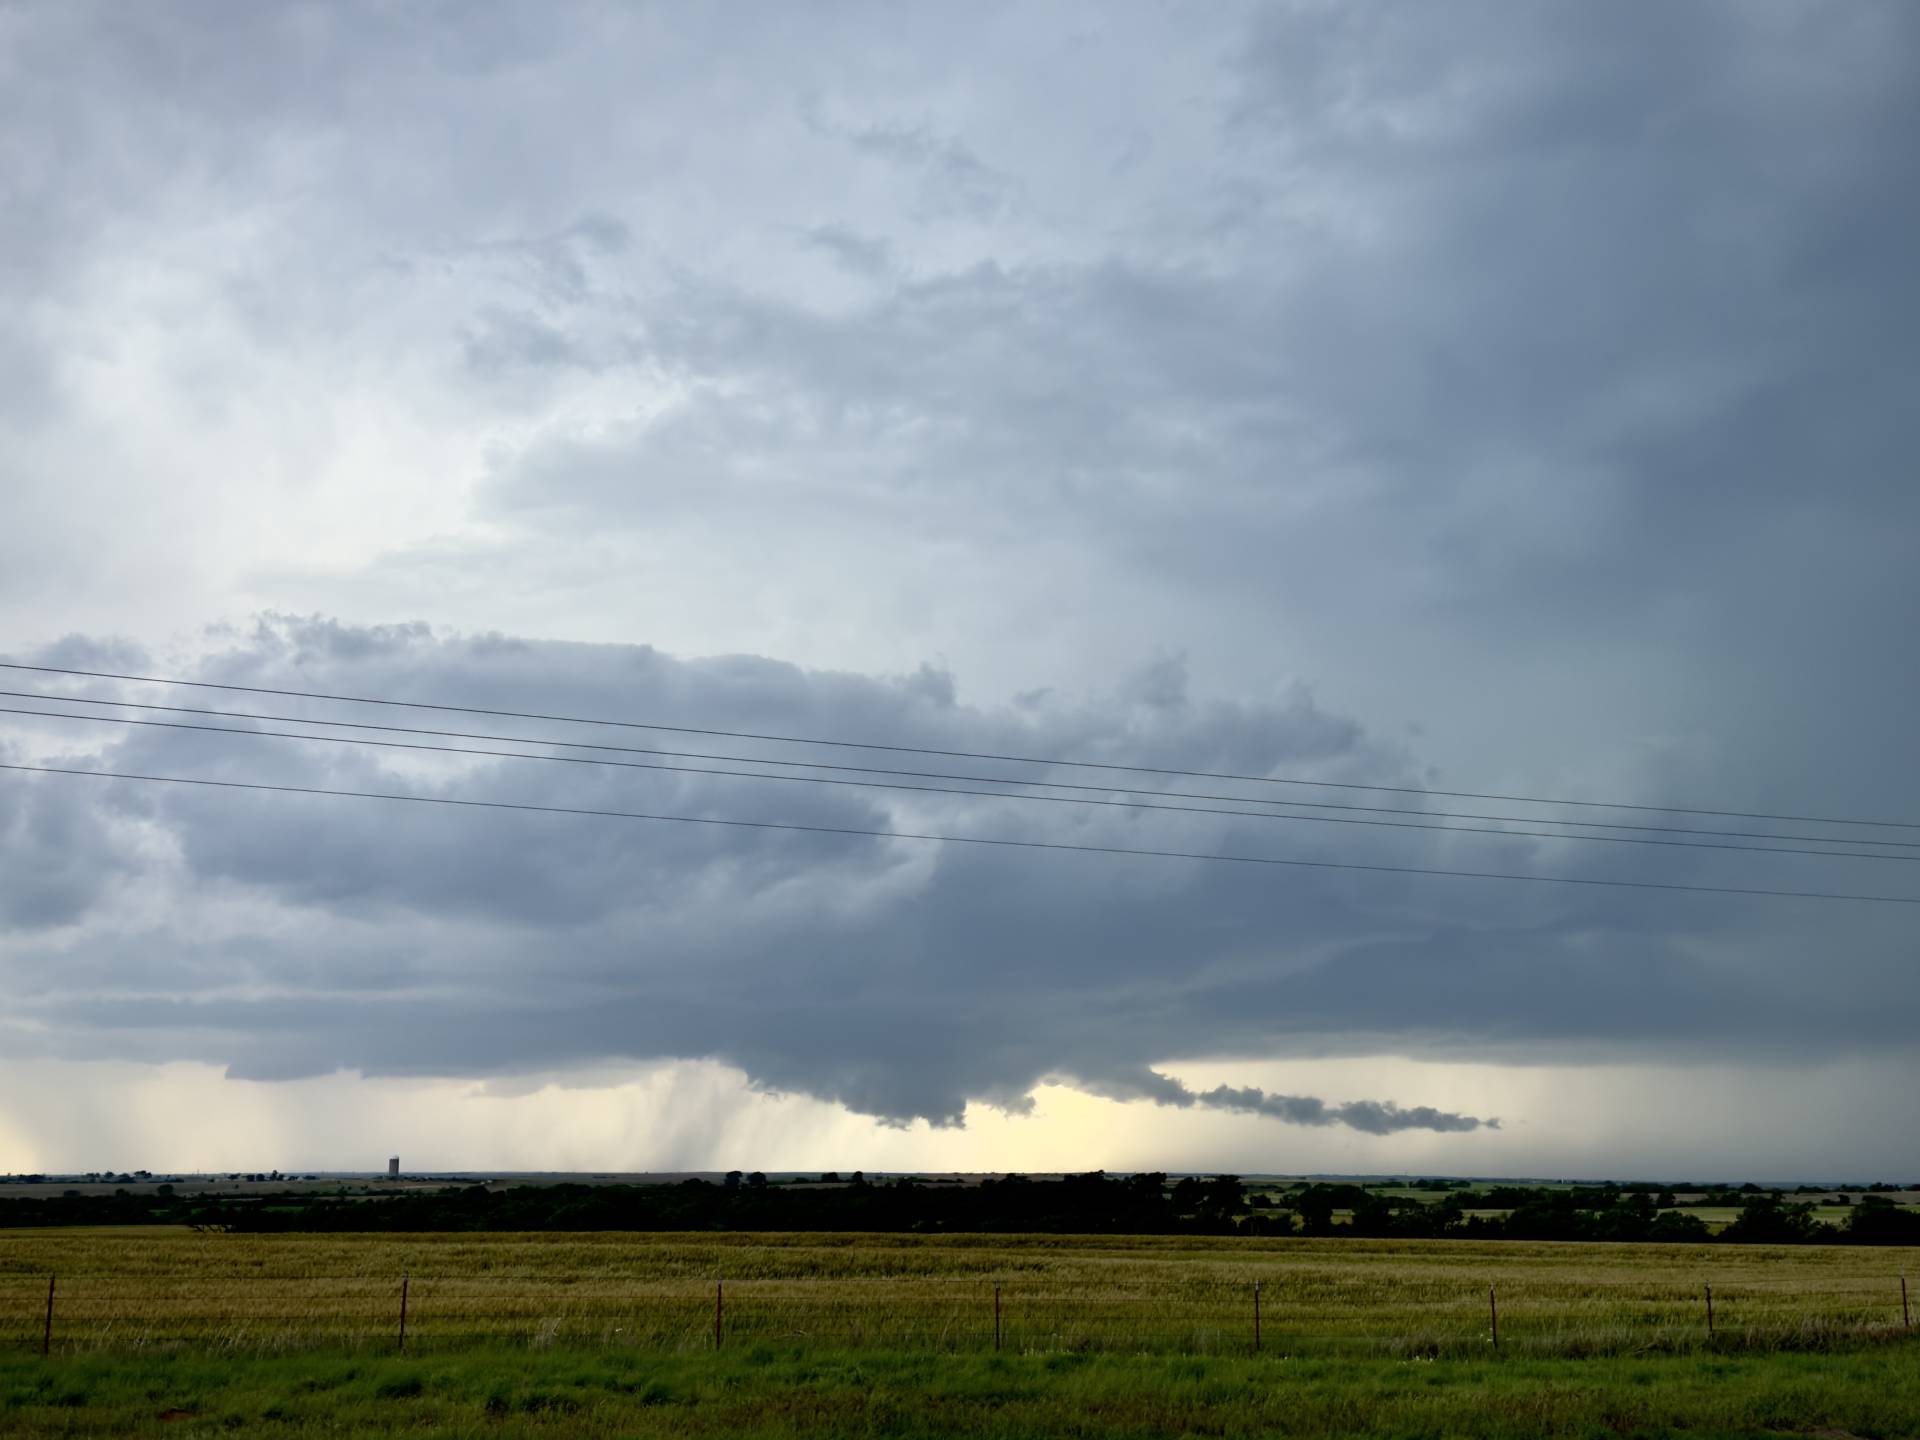 Severe warned storm near Custer City, OK, rotating and beginning to lower. 05:12 PM @NWSNorman @NWStulsa #okwx